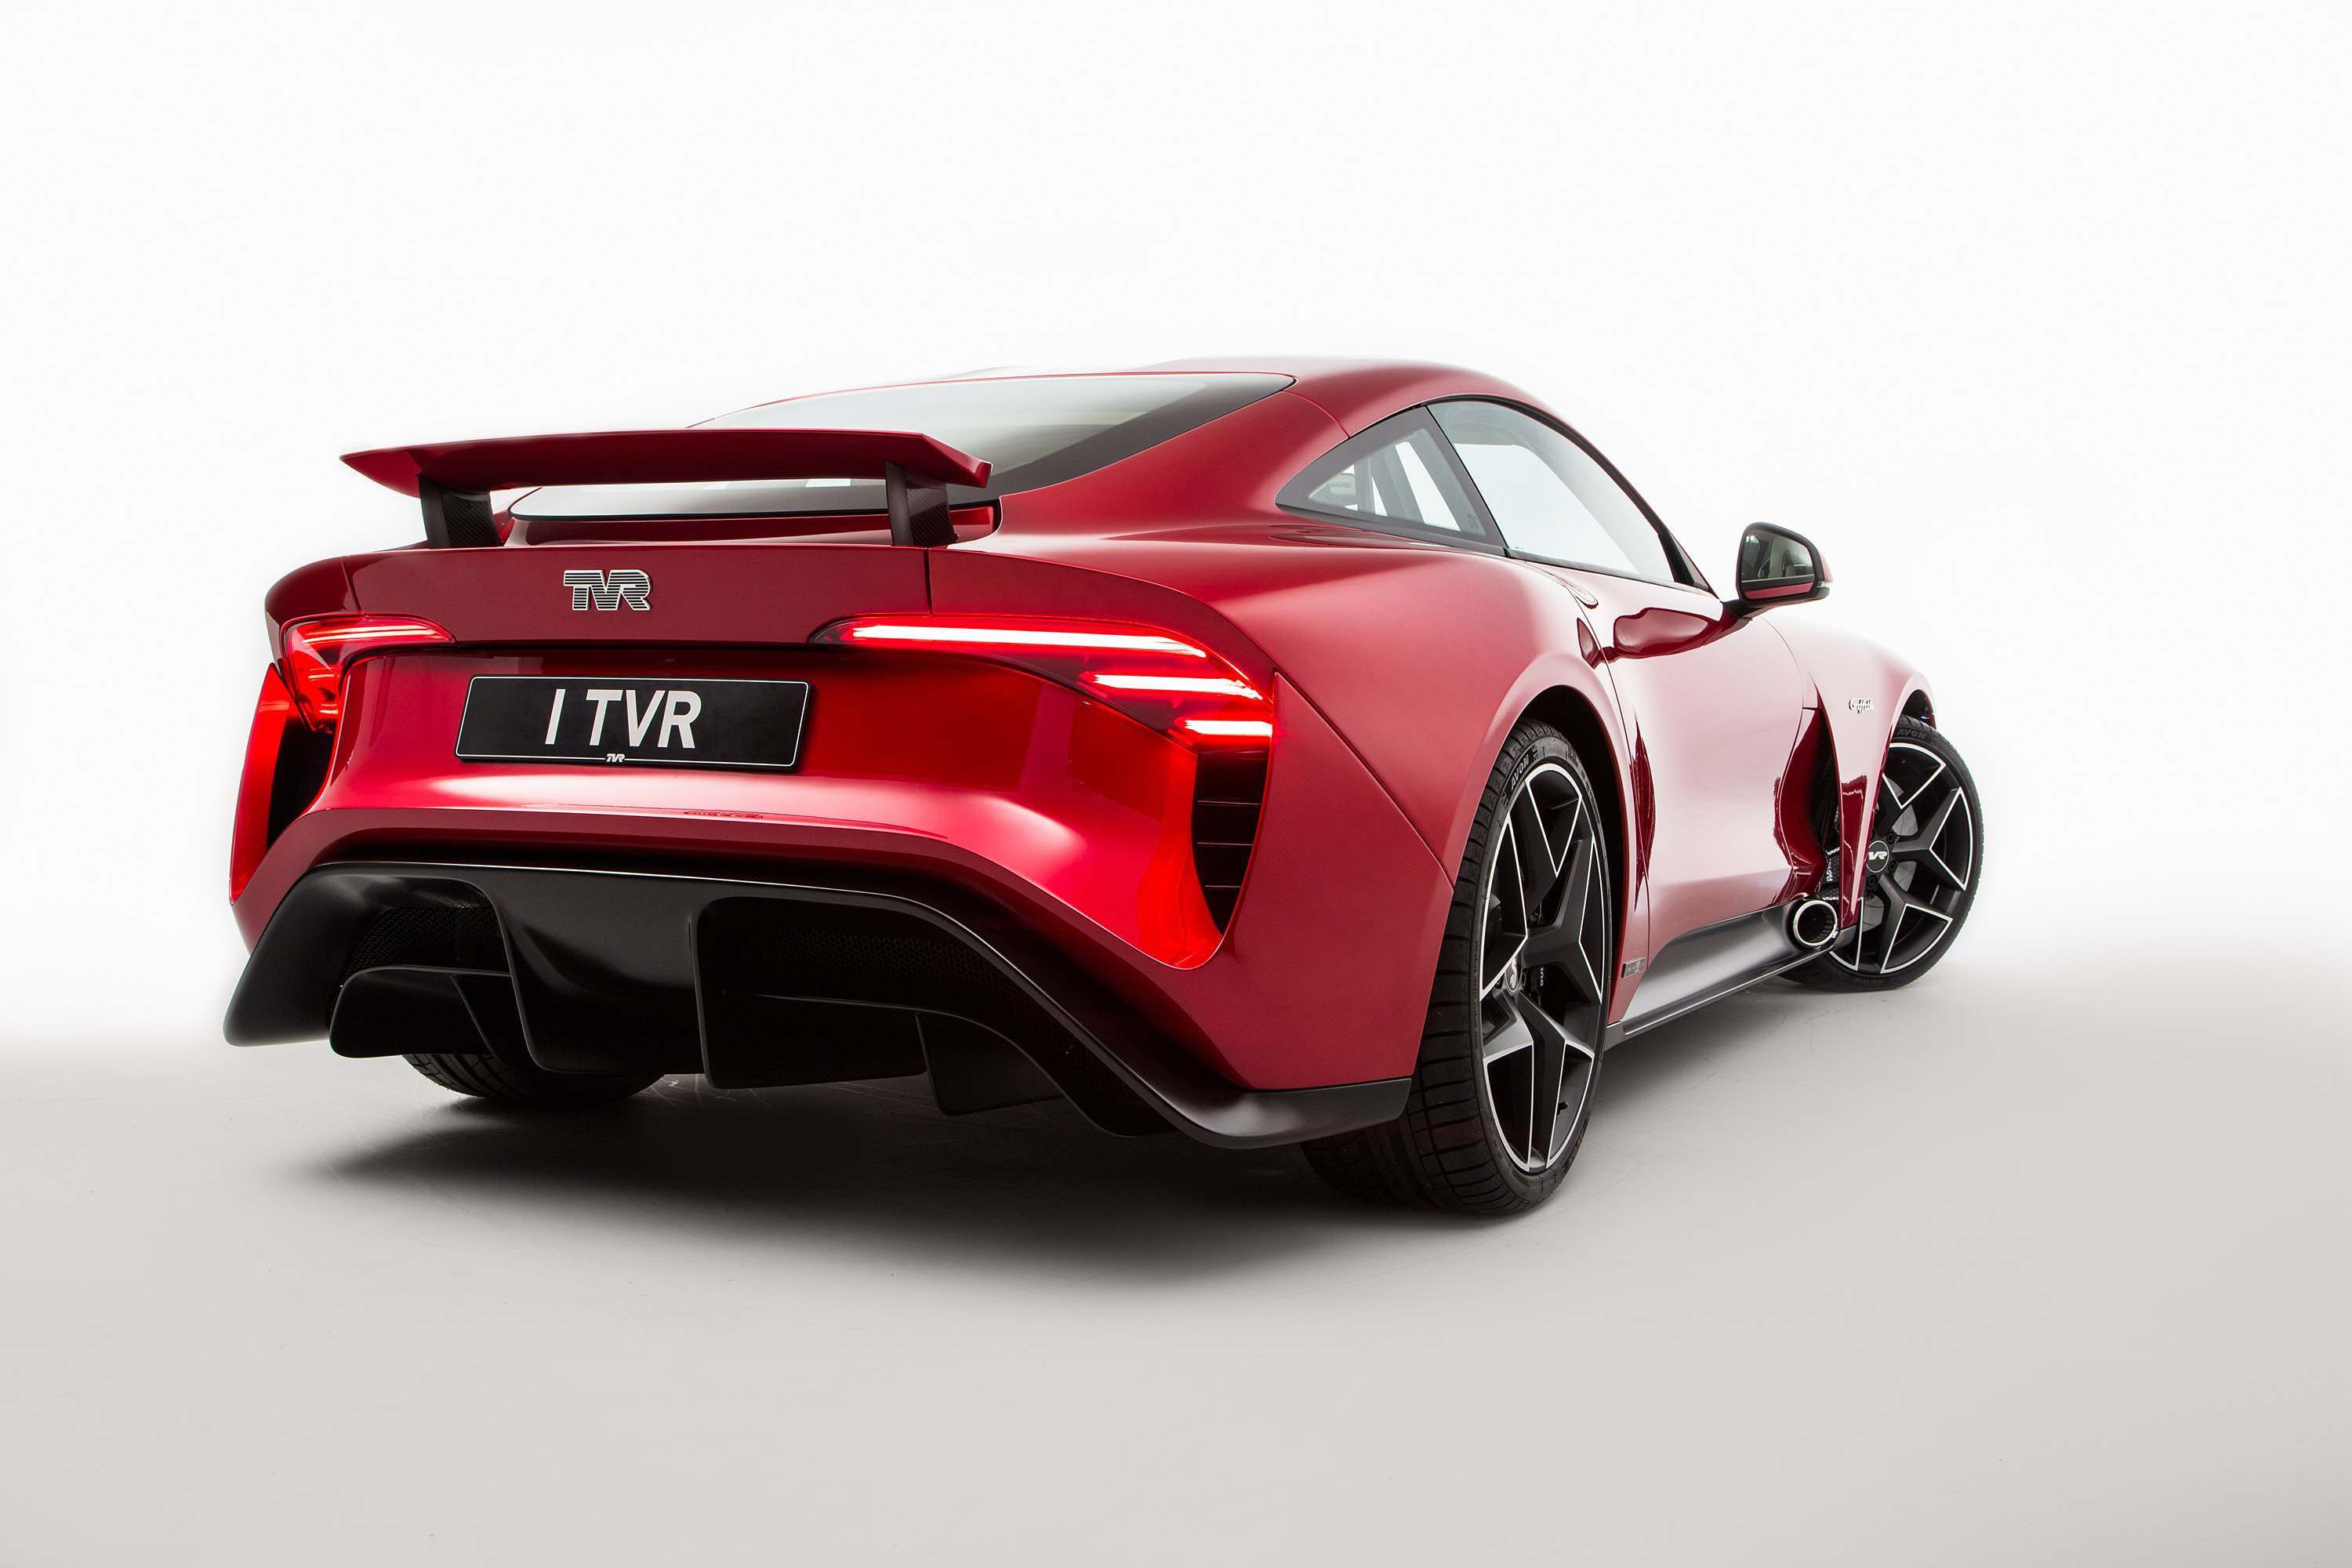  2018 TVR Griffith Wallpaper.